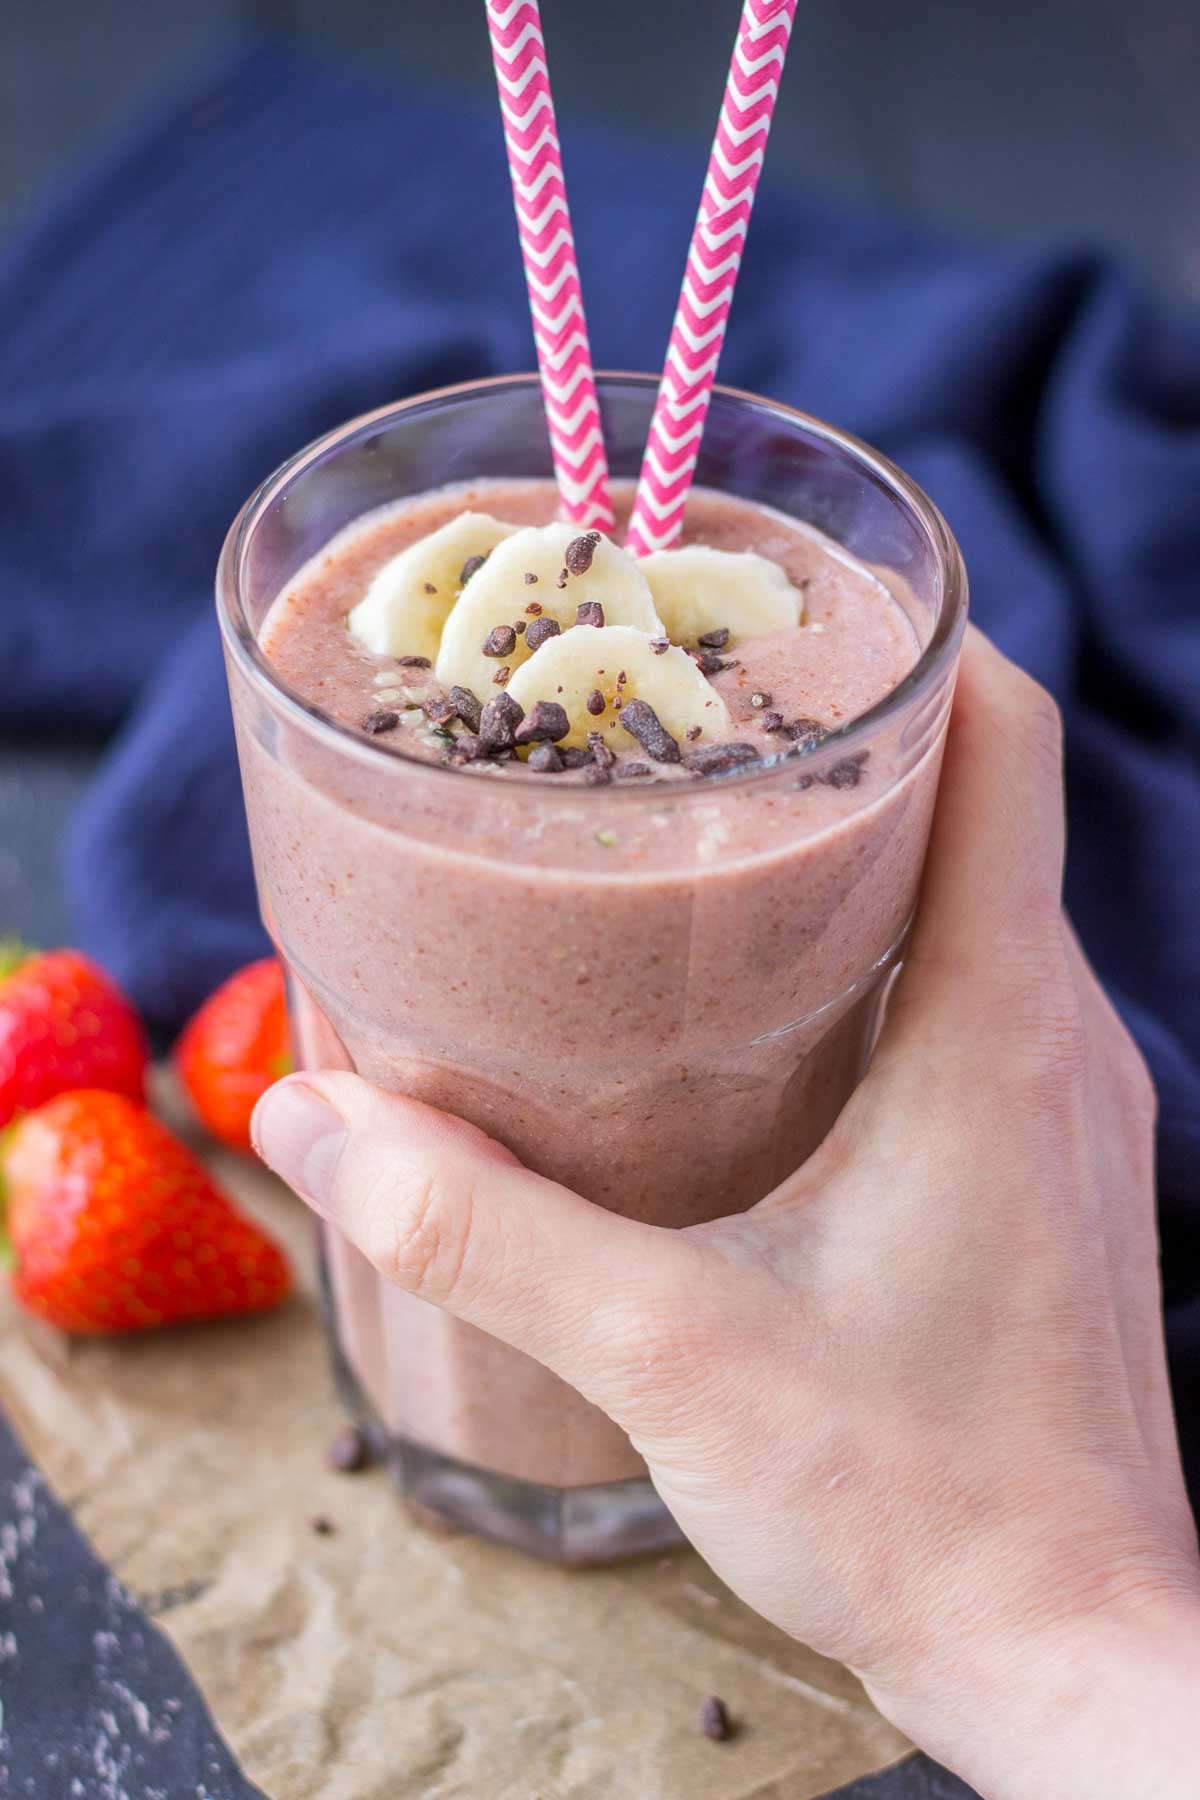 Hand holding Strawberry Banana Smoothie served in a glass